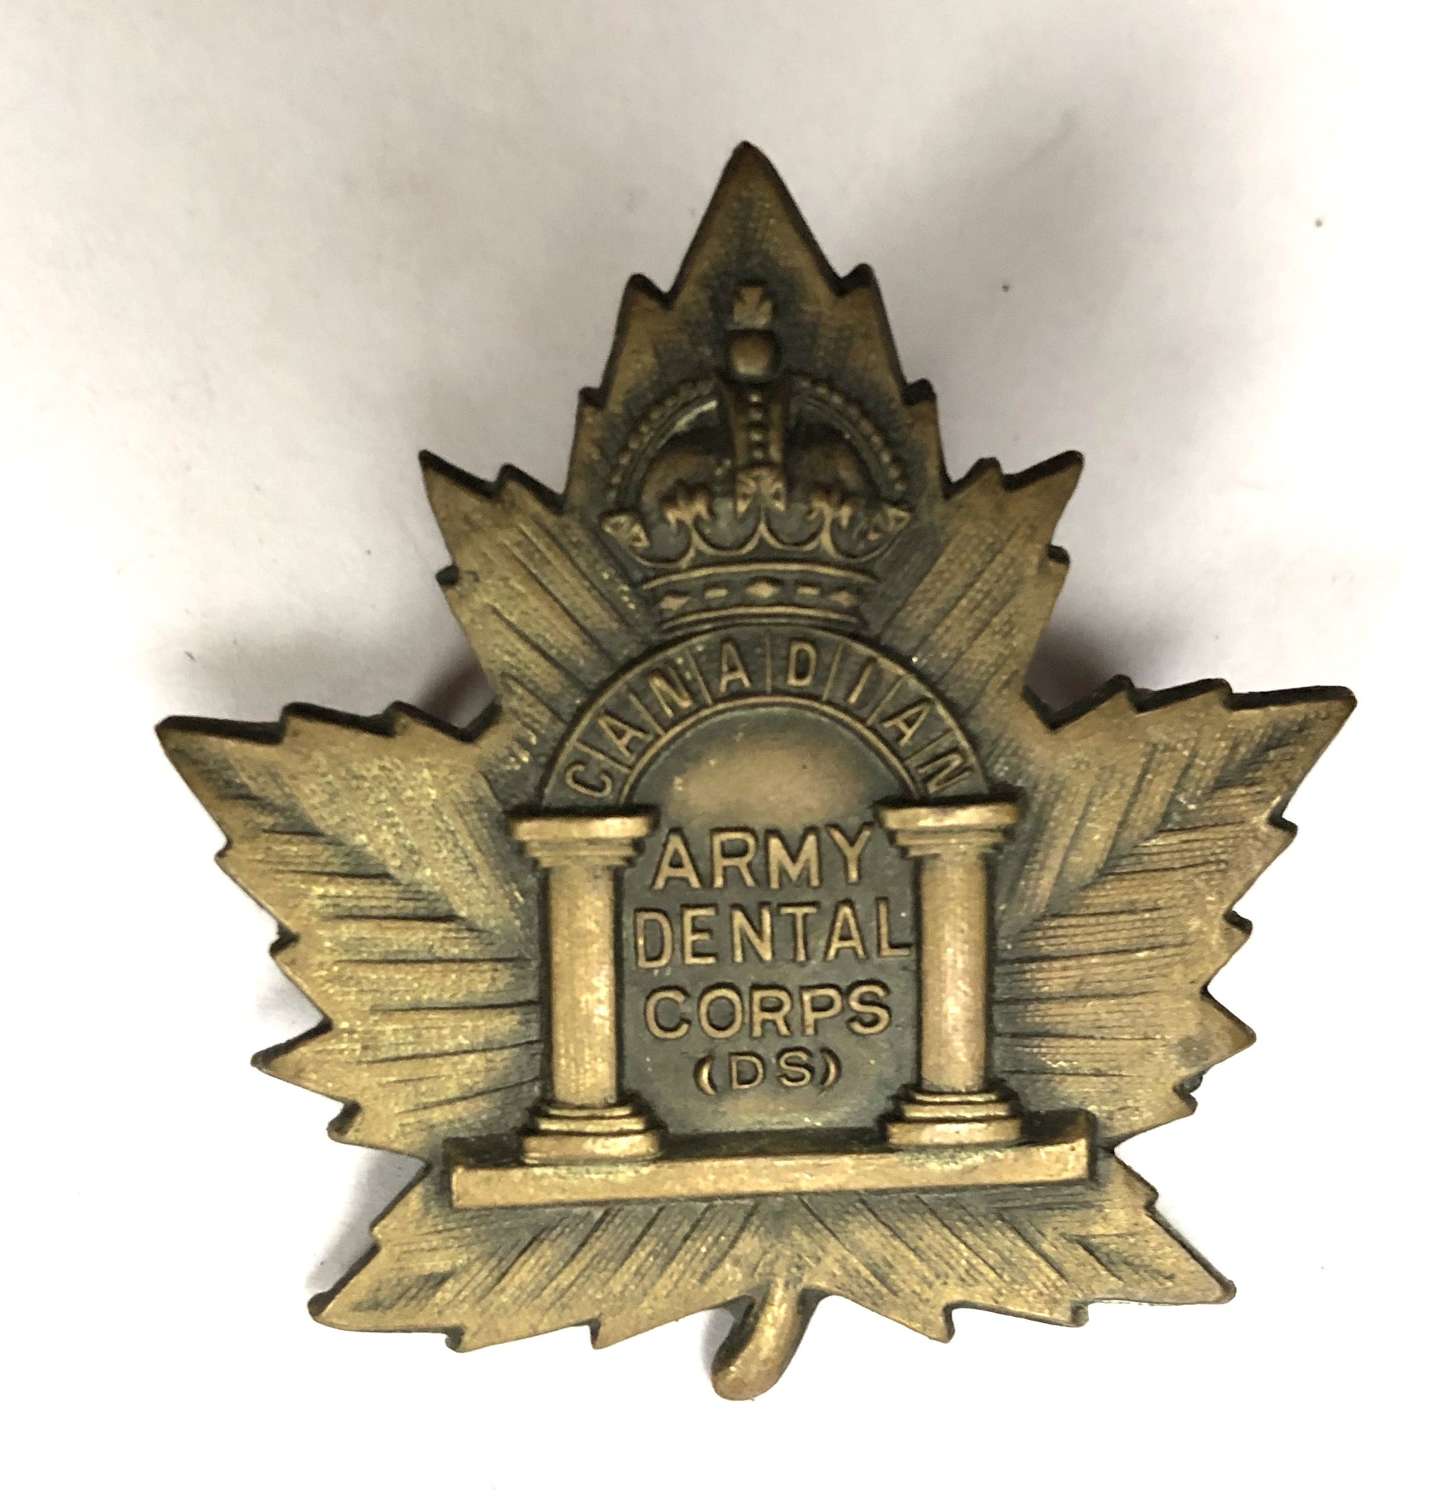 Canadian Army Dental Corps WW1 cap badge (DS)